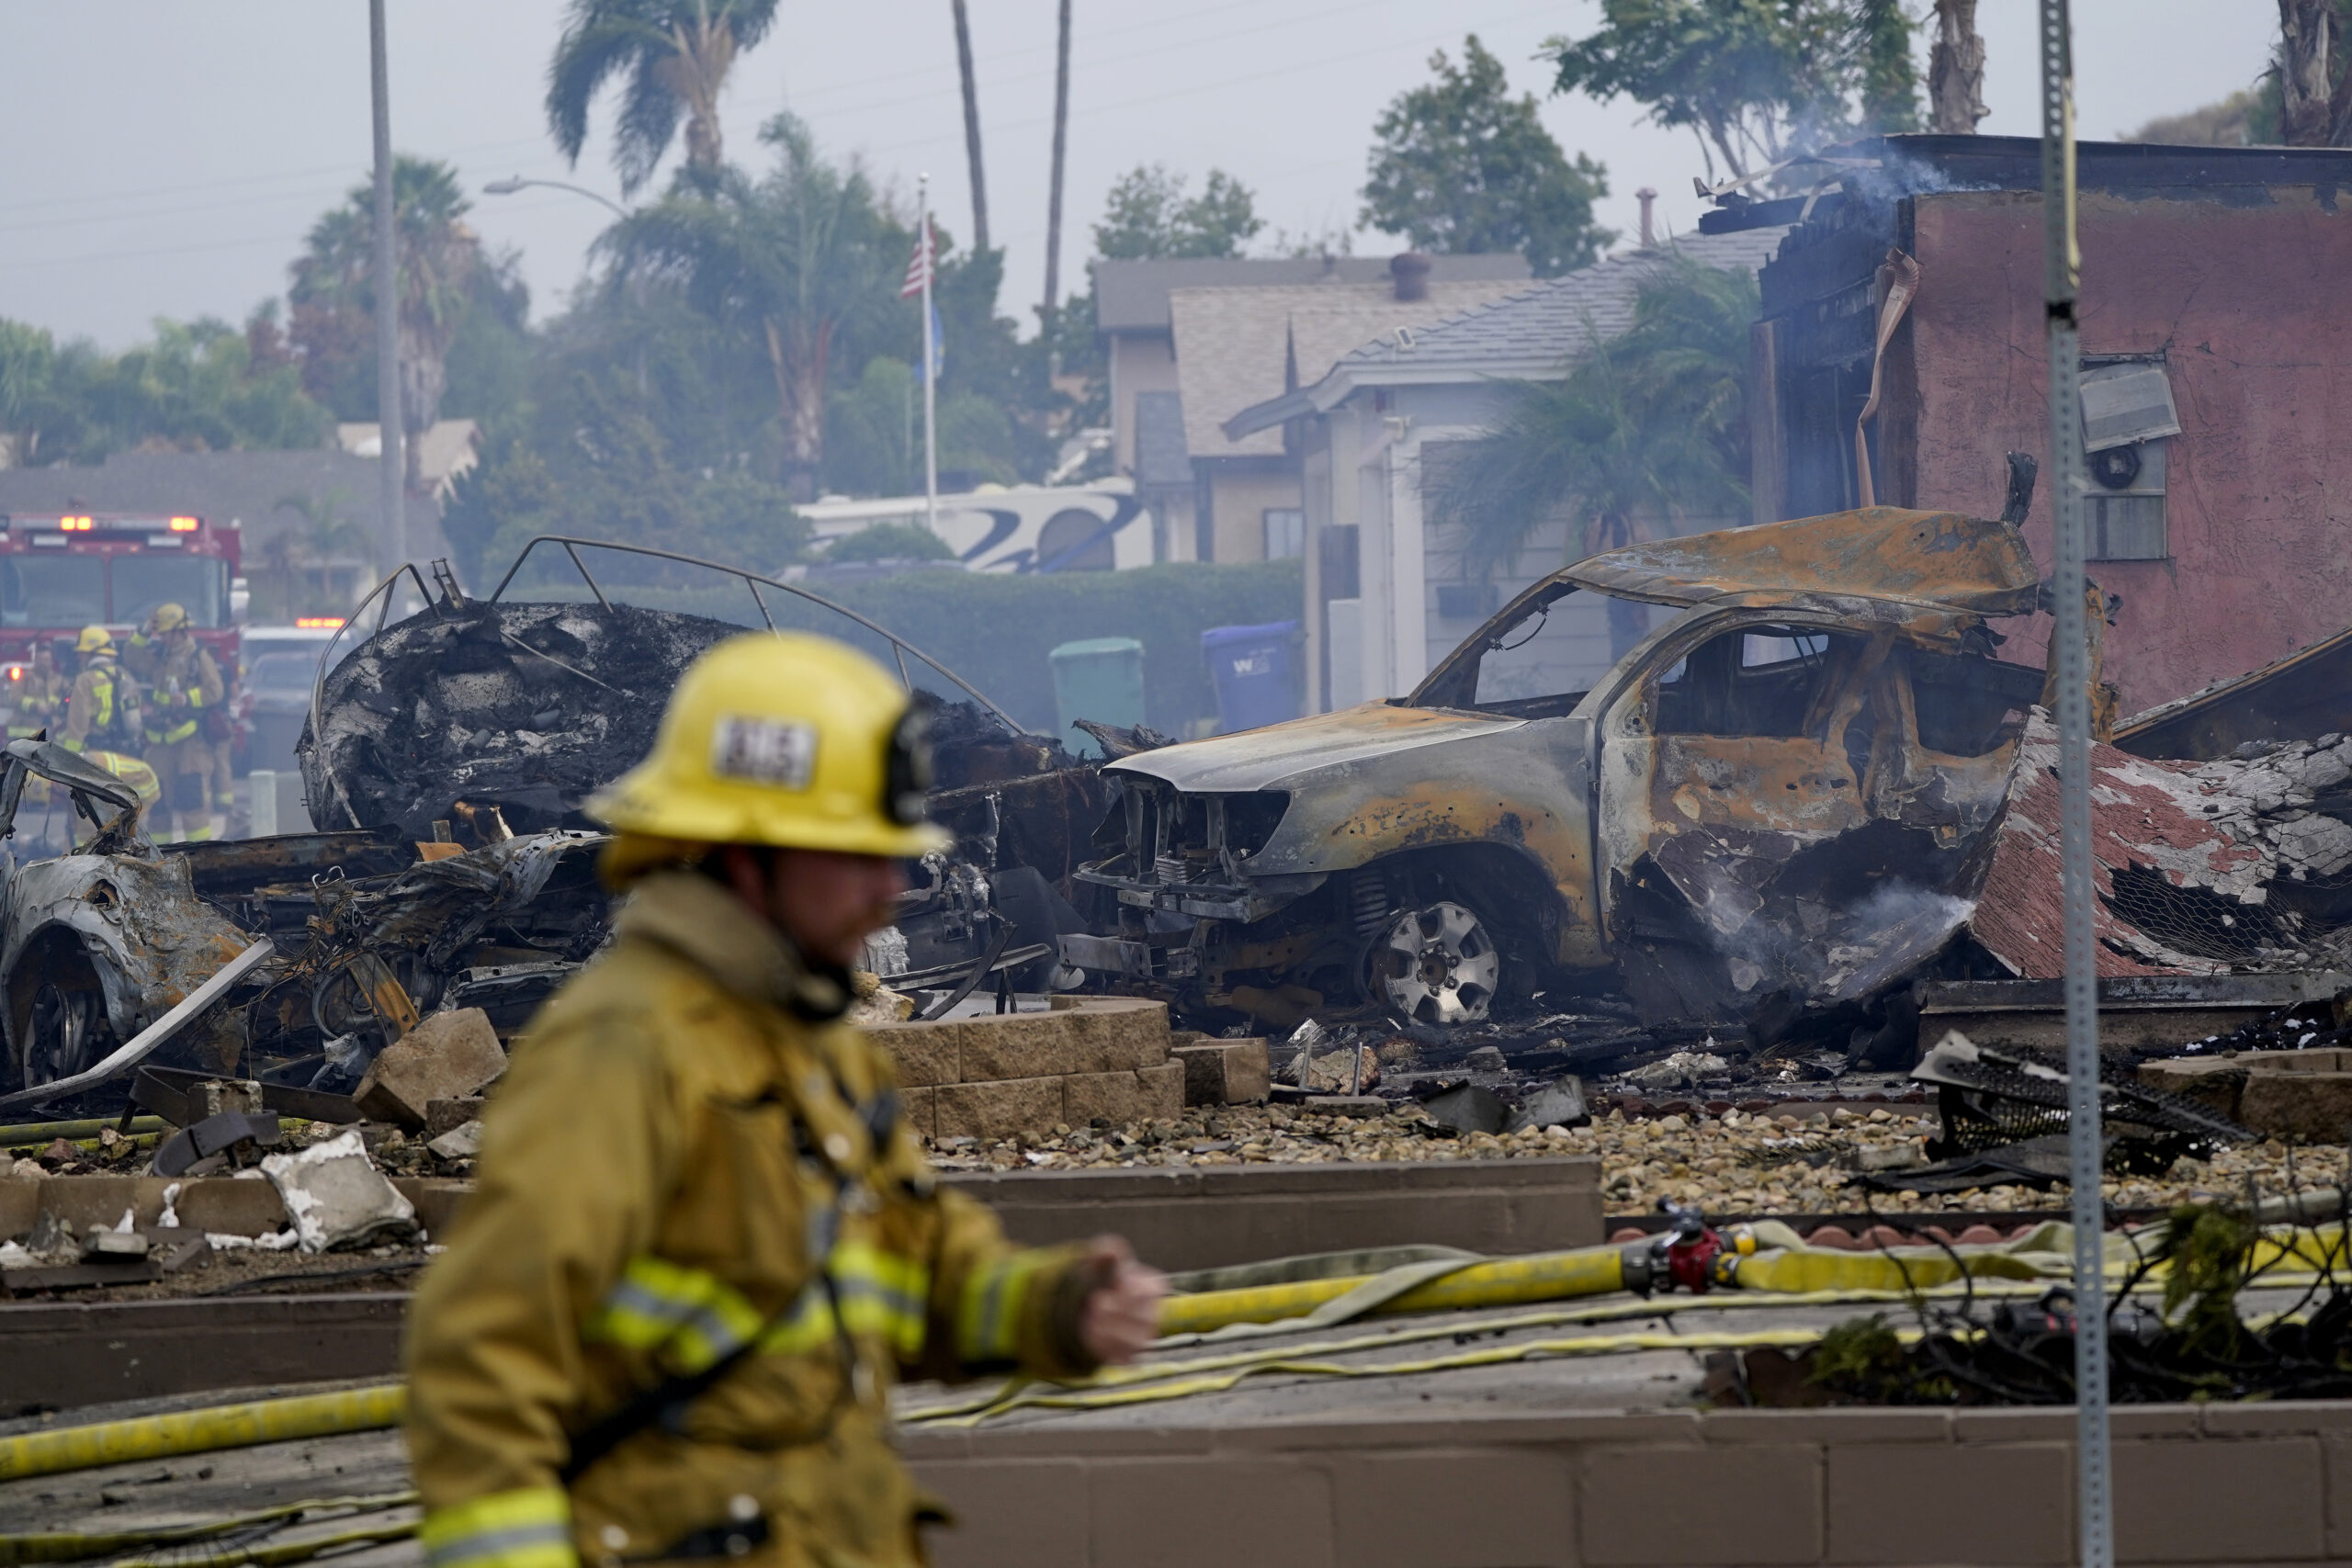 Fire crews work the scene of a small plane crash, Monday, Oct. 11, 2021, in Santee, Calif. At least two people were killed and two others were injured when the plane crashed into a suburban Southern California neighborhood, setting two homes ablaze, authorities said. (AP Photo/Gregory Bull)